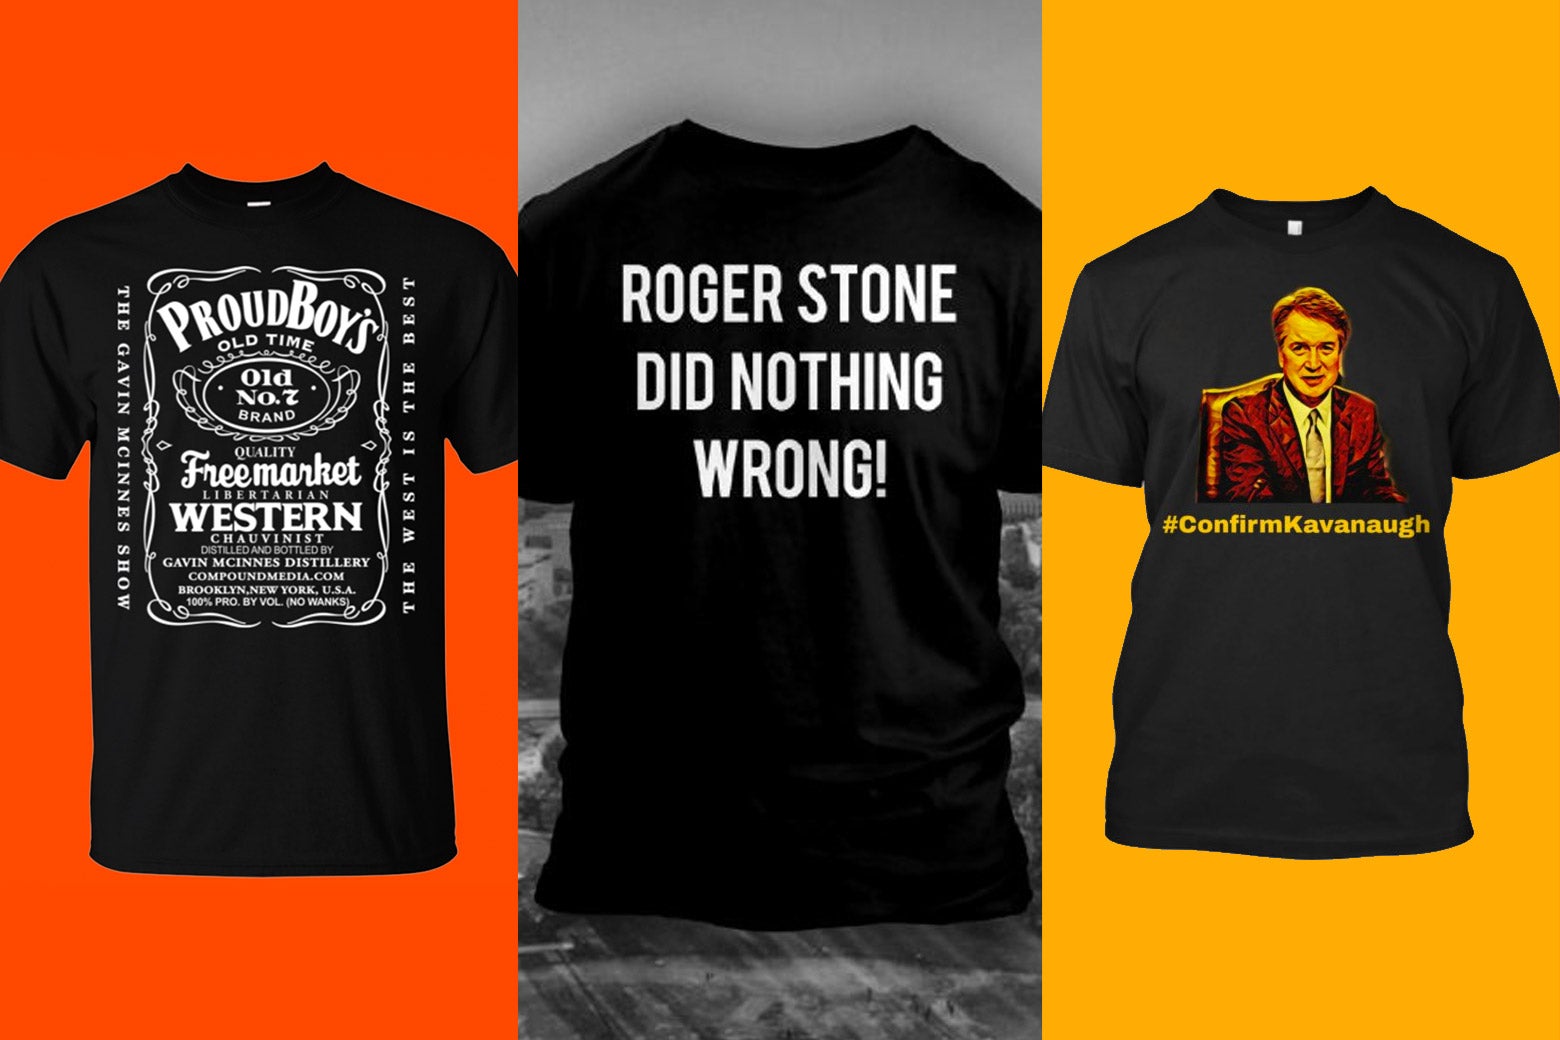 T-shirts with slogans in favor of the Proud Boys, Roger Stone, and Brett Kavanaugh.